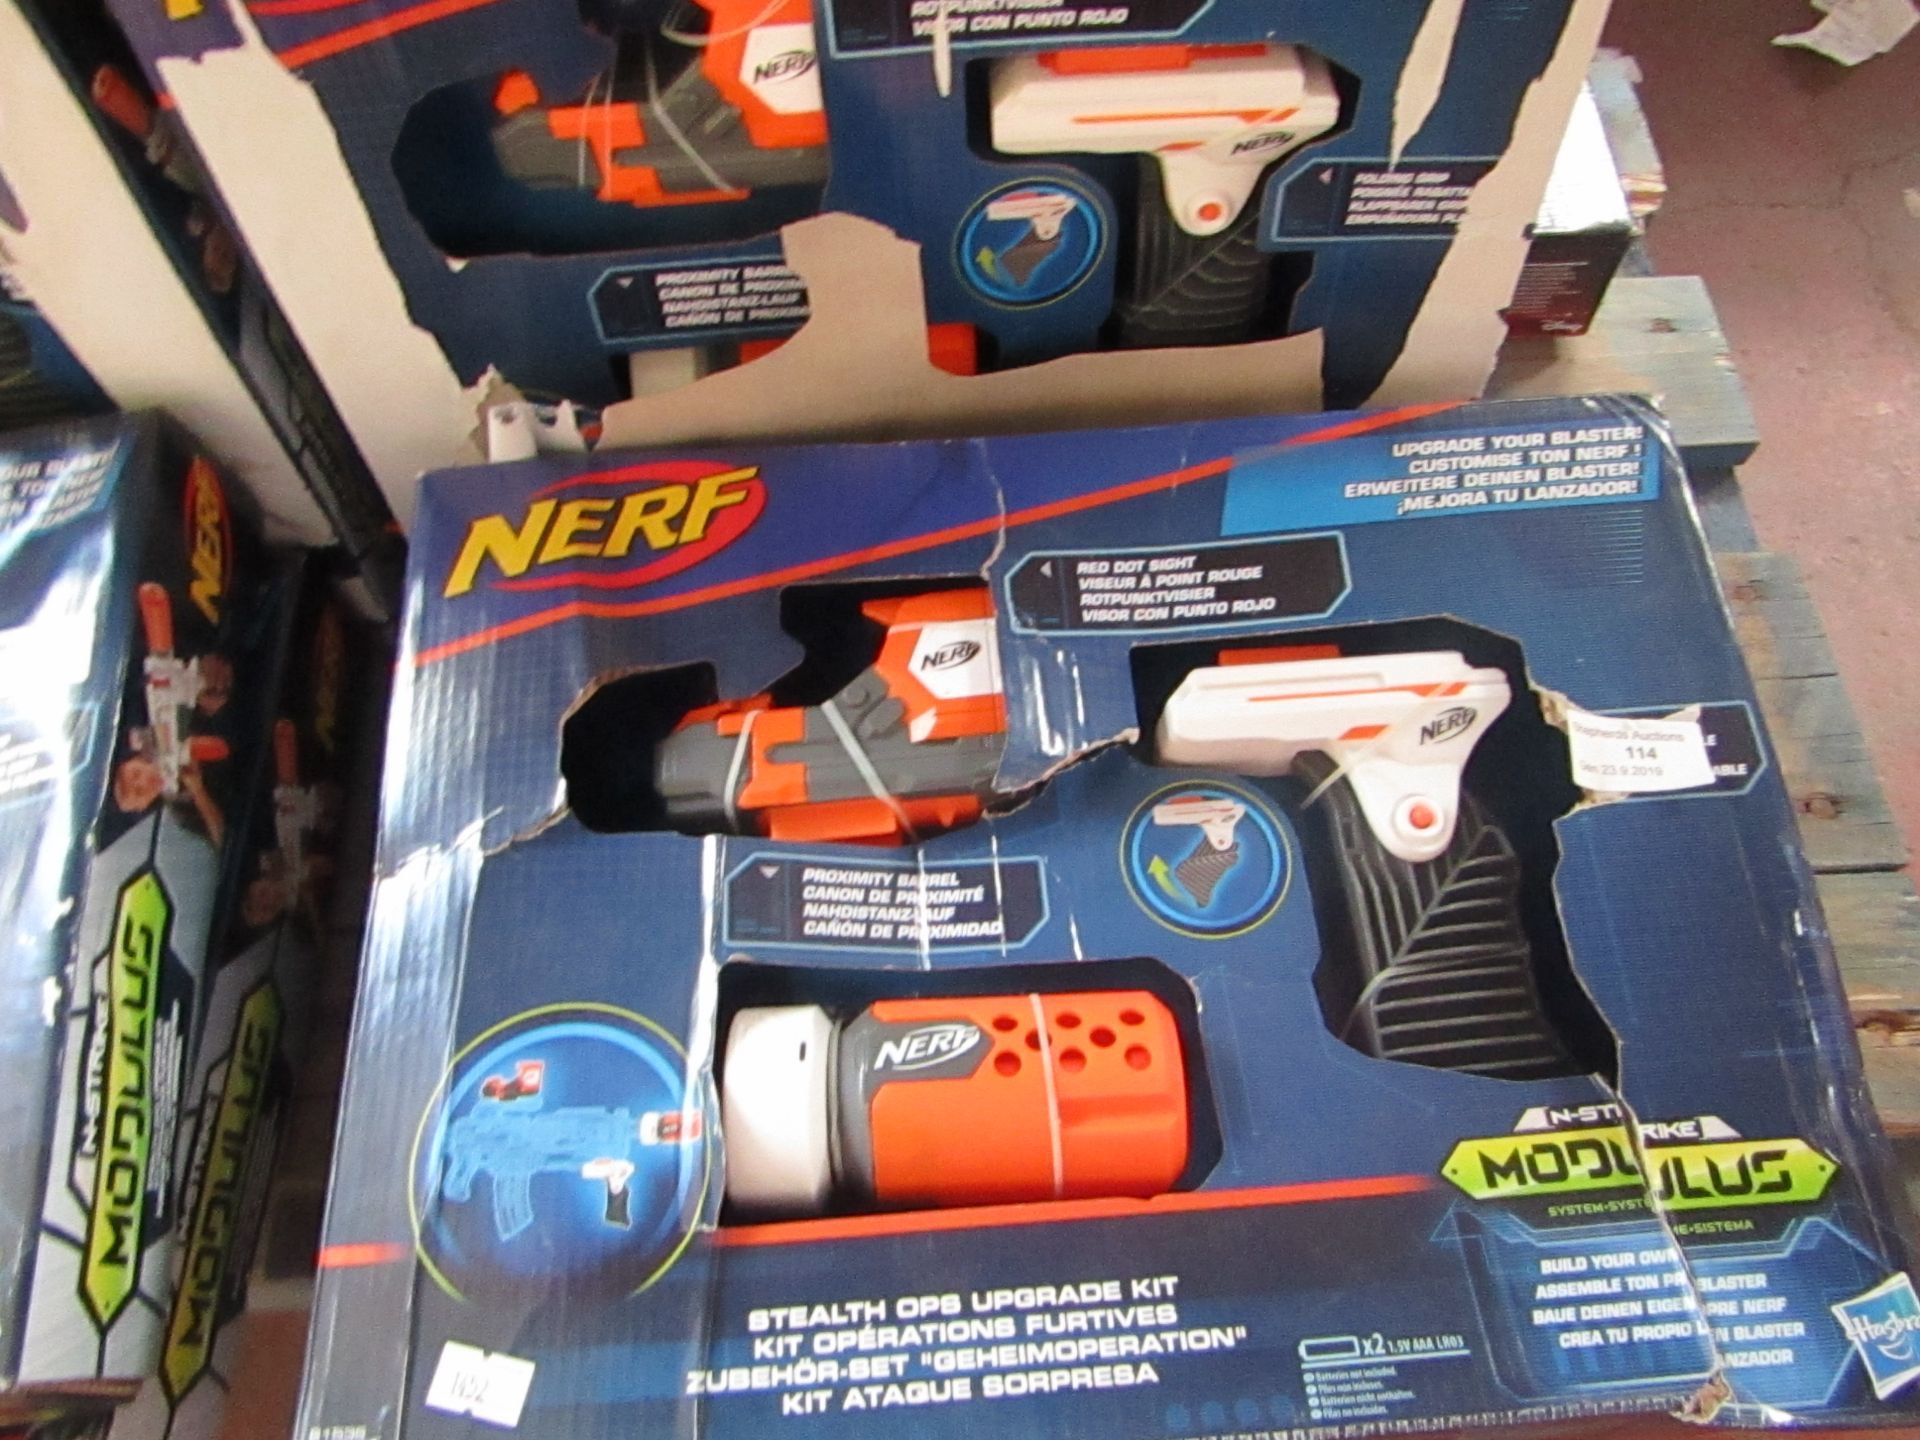 3x Nerf stealth ops upgrade kit, all in damaged packaging.